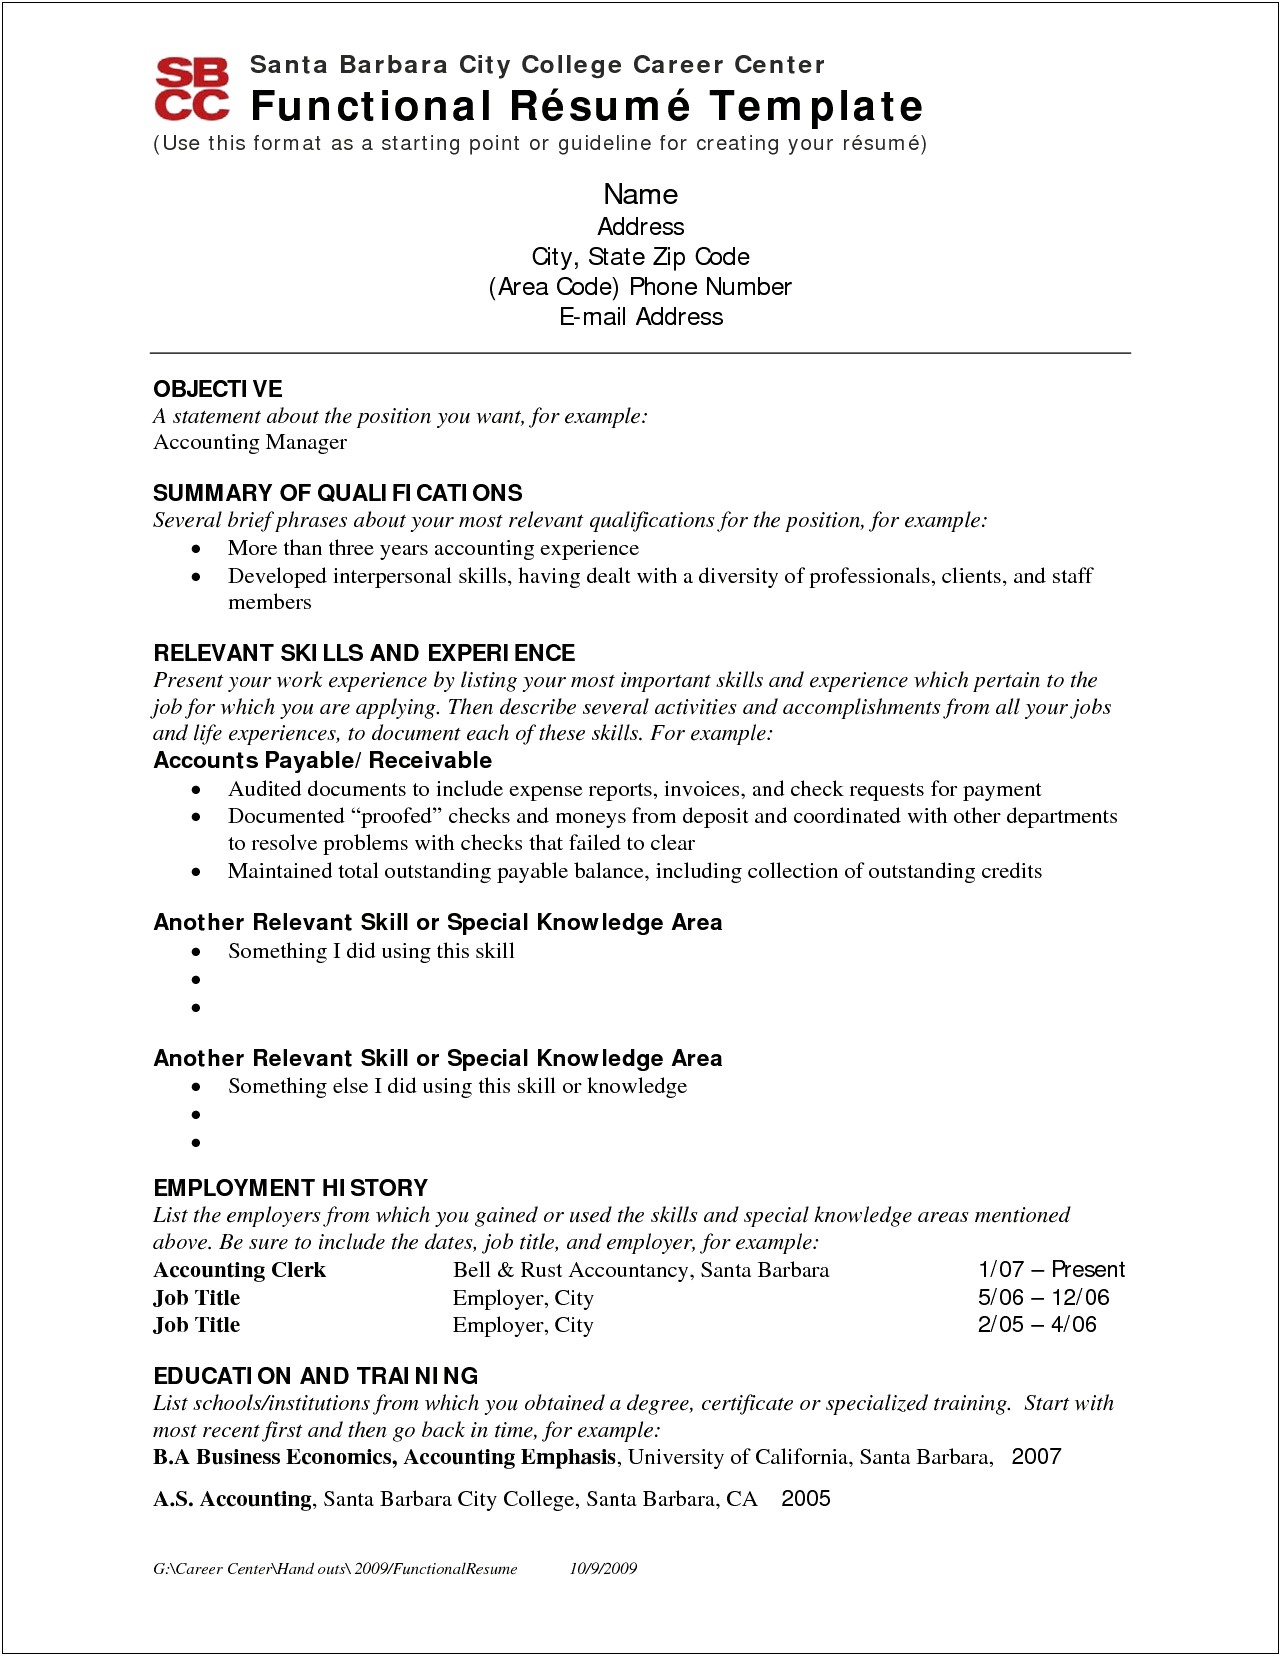 Important Skills To List On Functional Resume